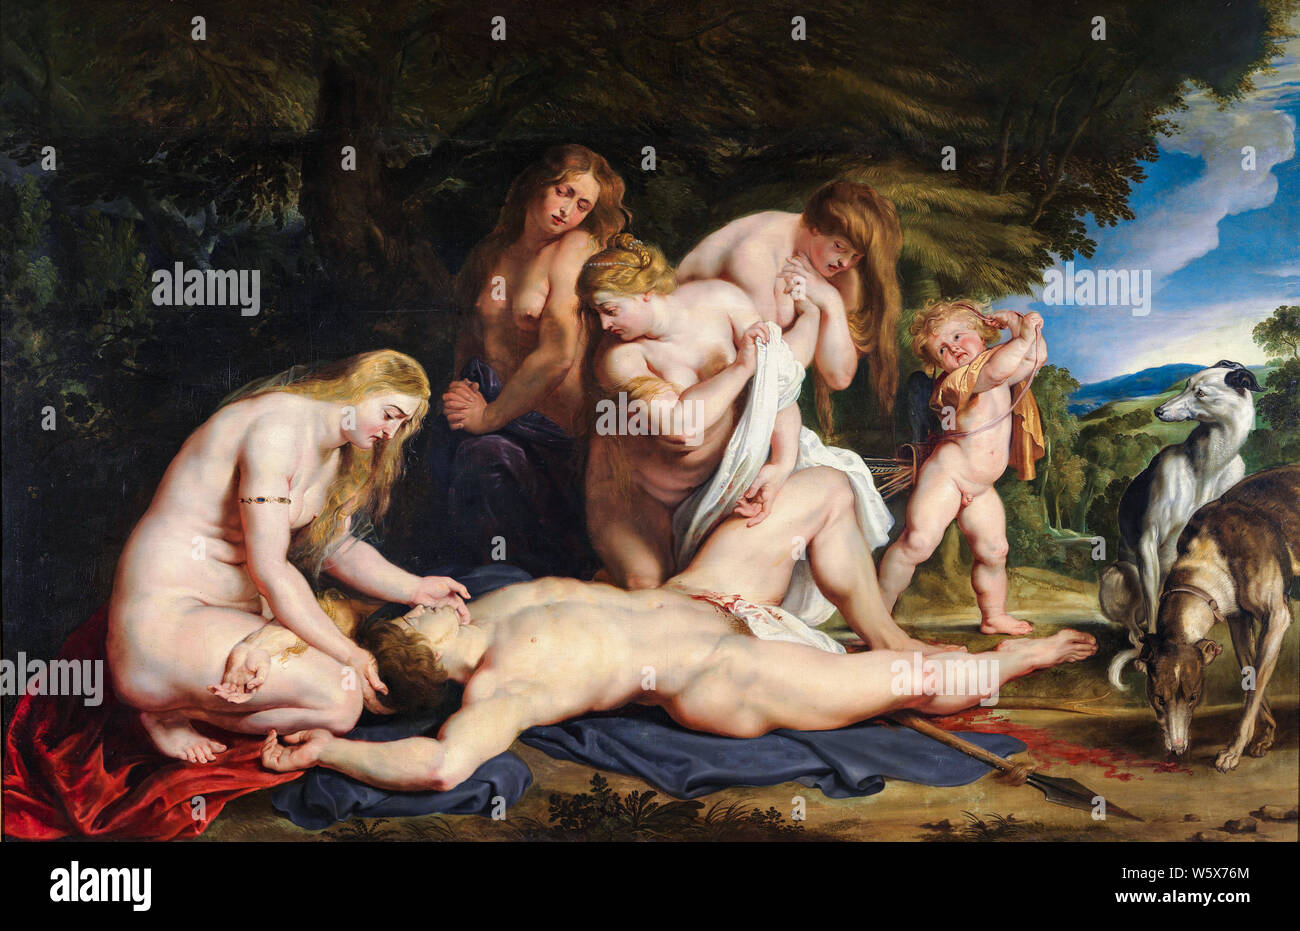 Peter Paul Rubens, The Death of Adonis (with Venus, Cupid, and the Three Graces), painting, 1614 Stock Photo